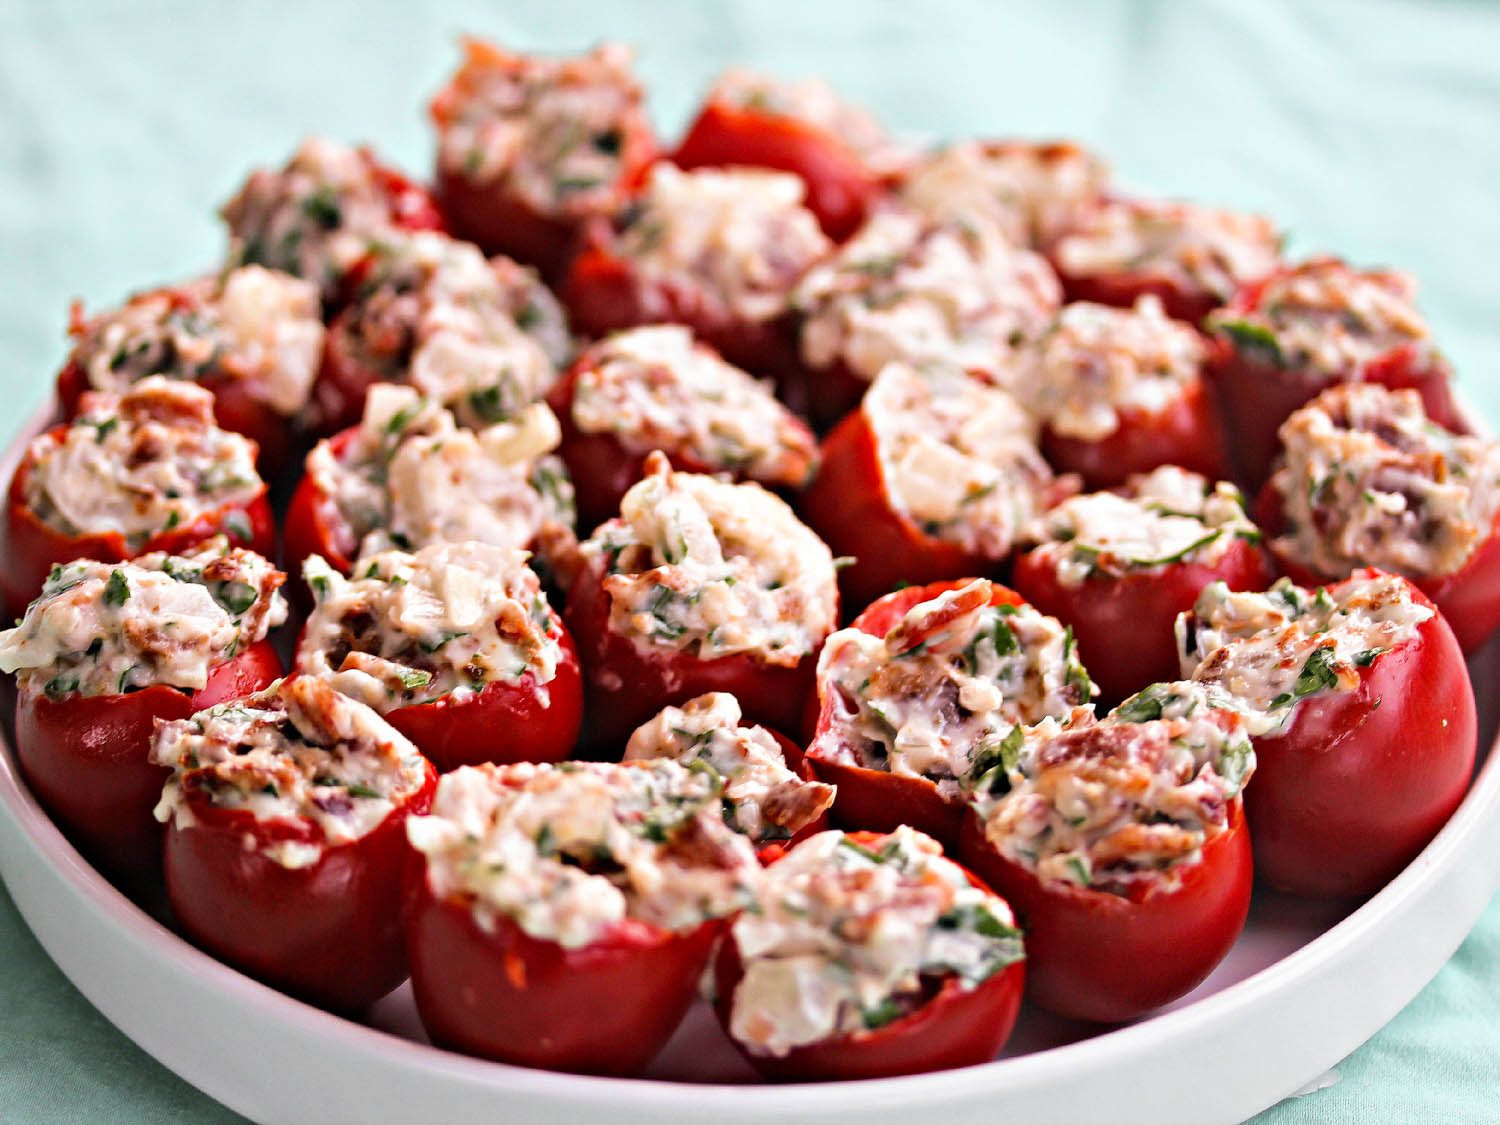 Cherry Tomato Appetizer Recipes
 Stuffed Cherry Tomatoes With Bacon Parmesan and Parsley